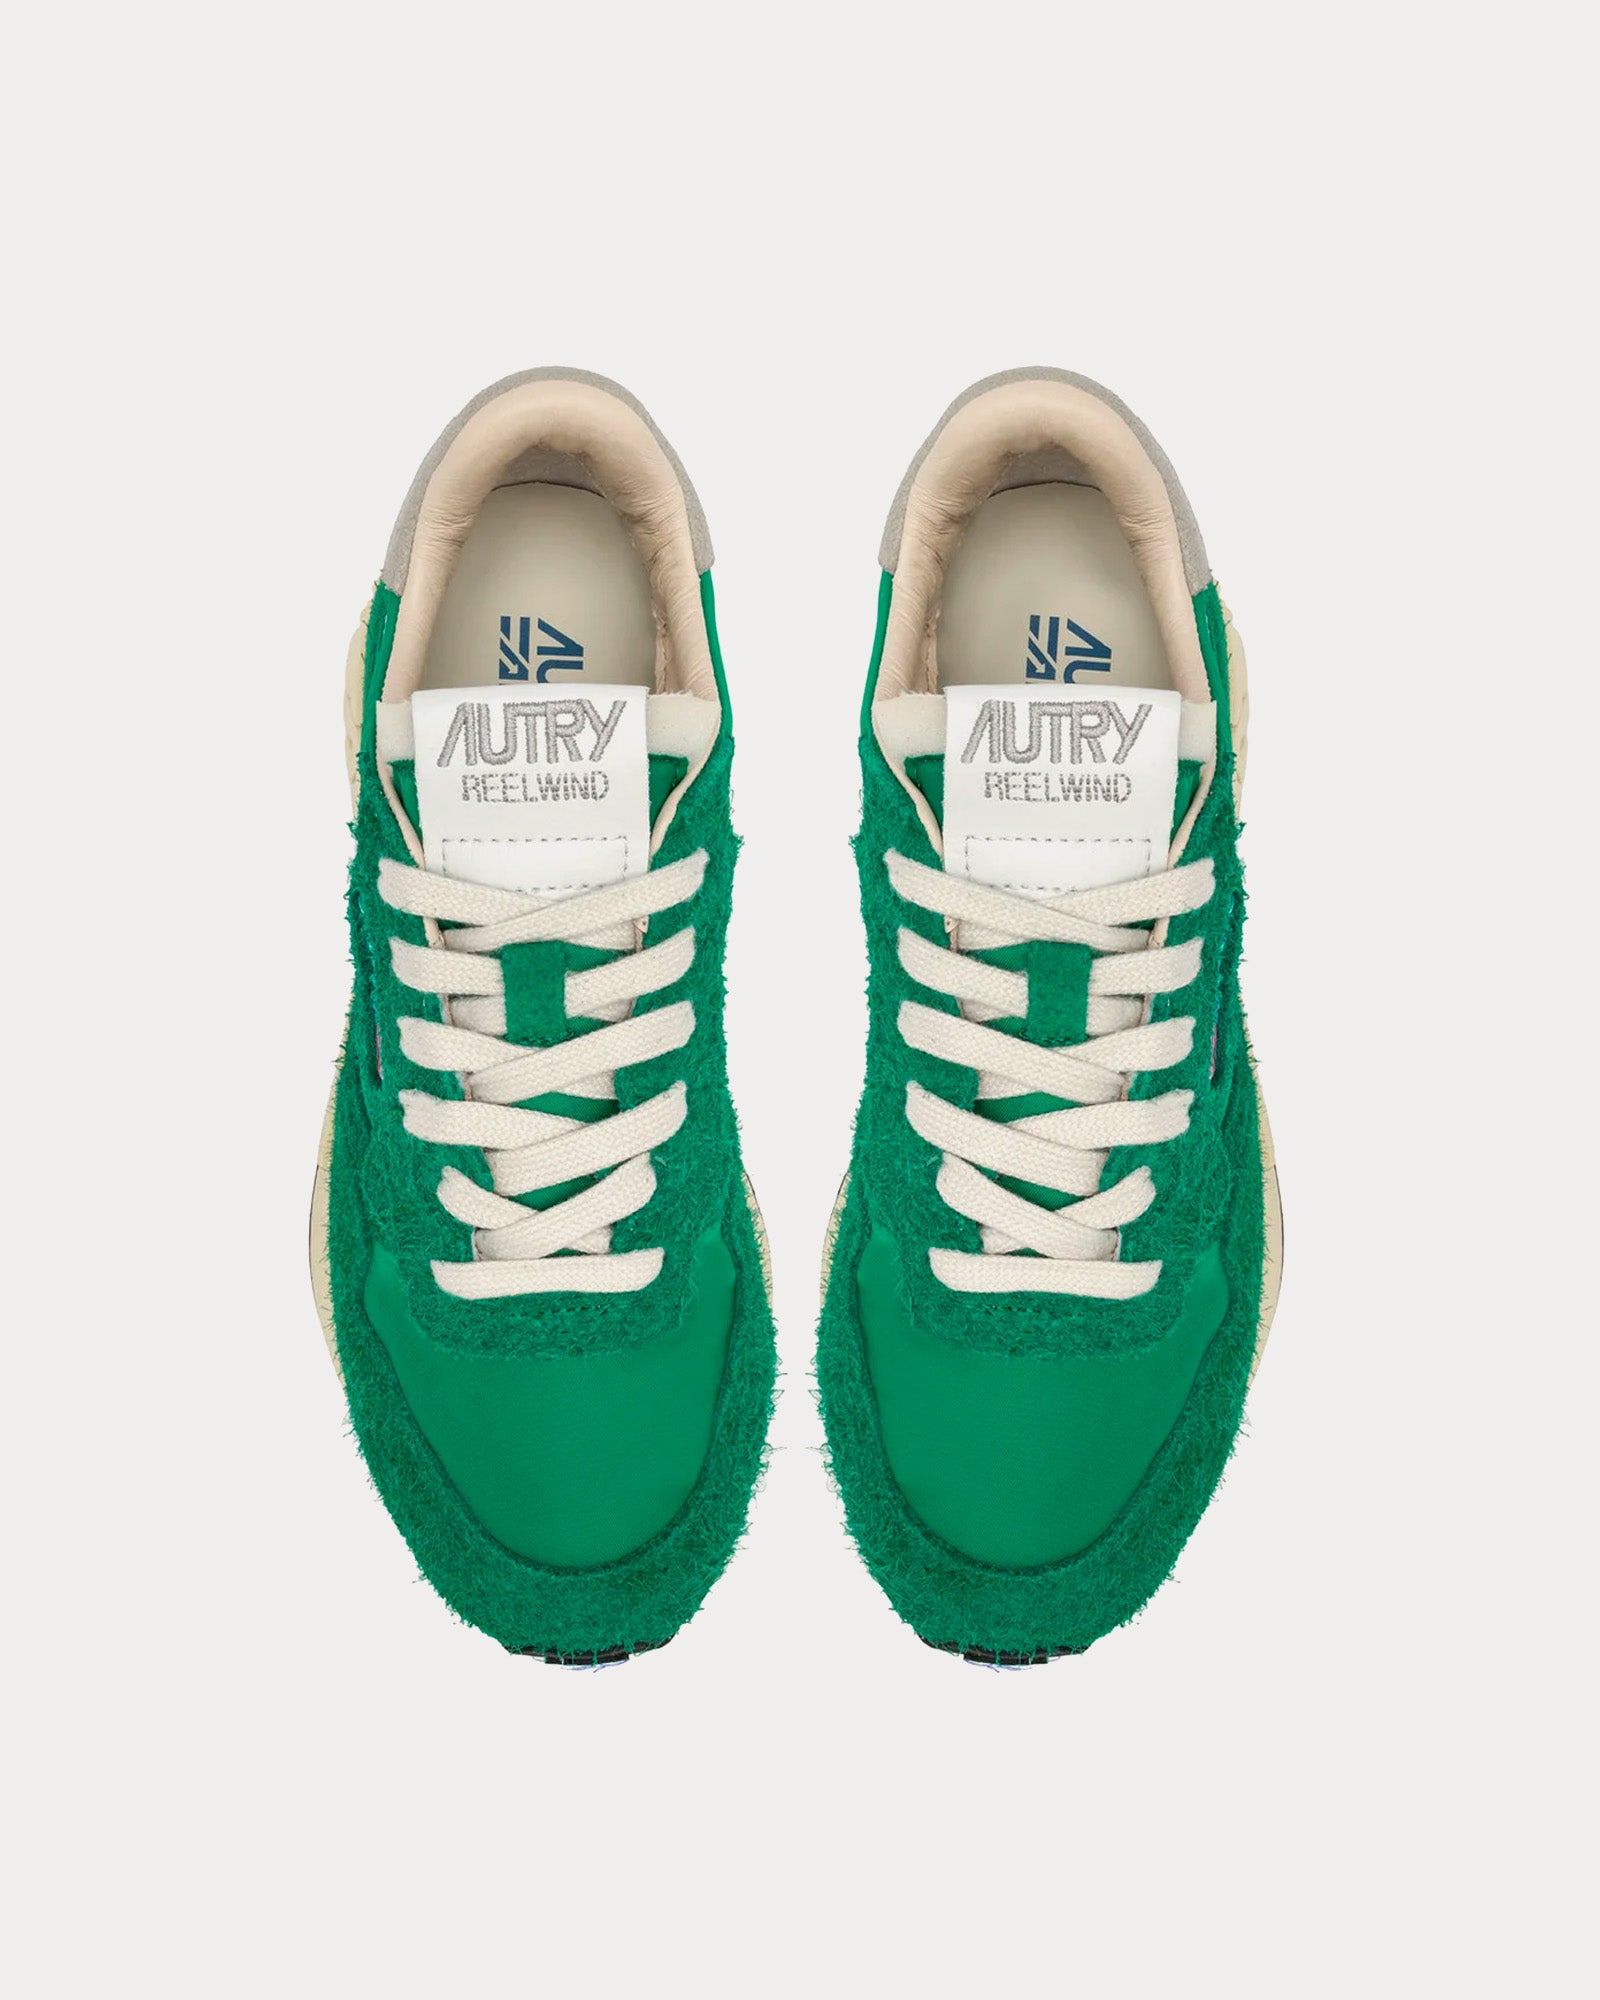 Autry - Reelwind Nylon & Suede Green Low Top Sneakers